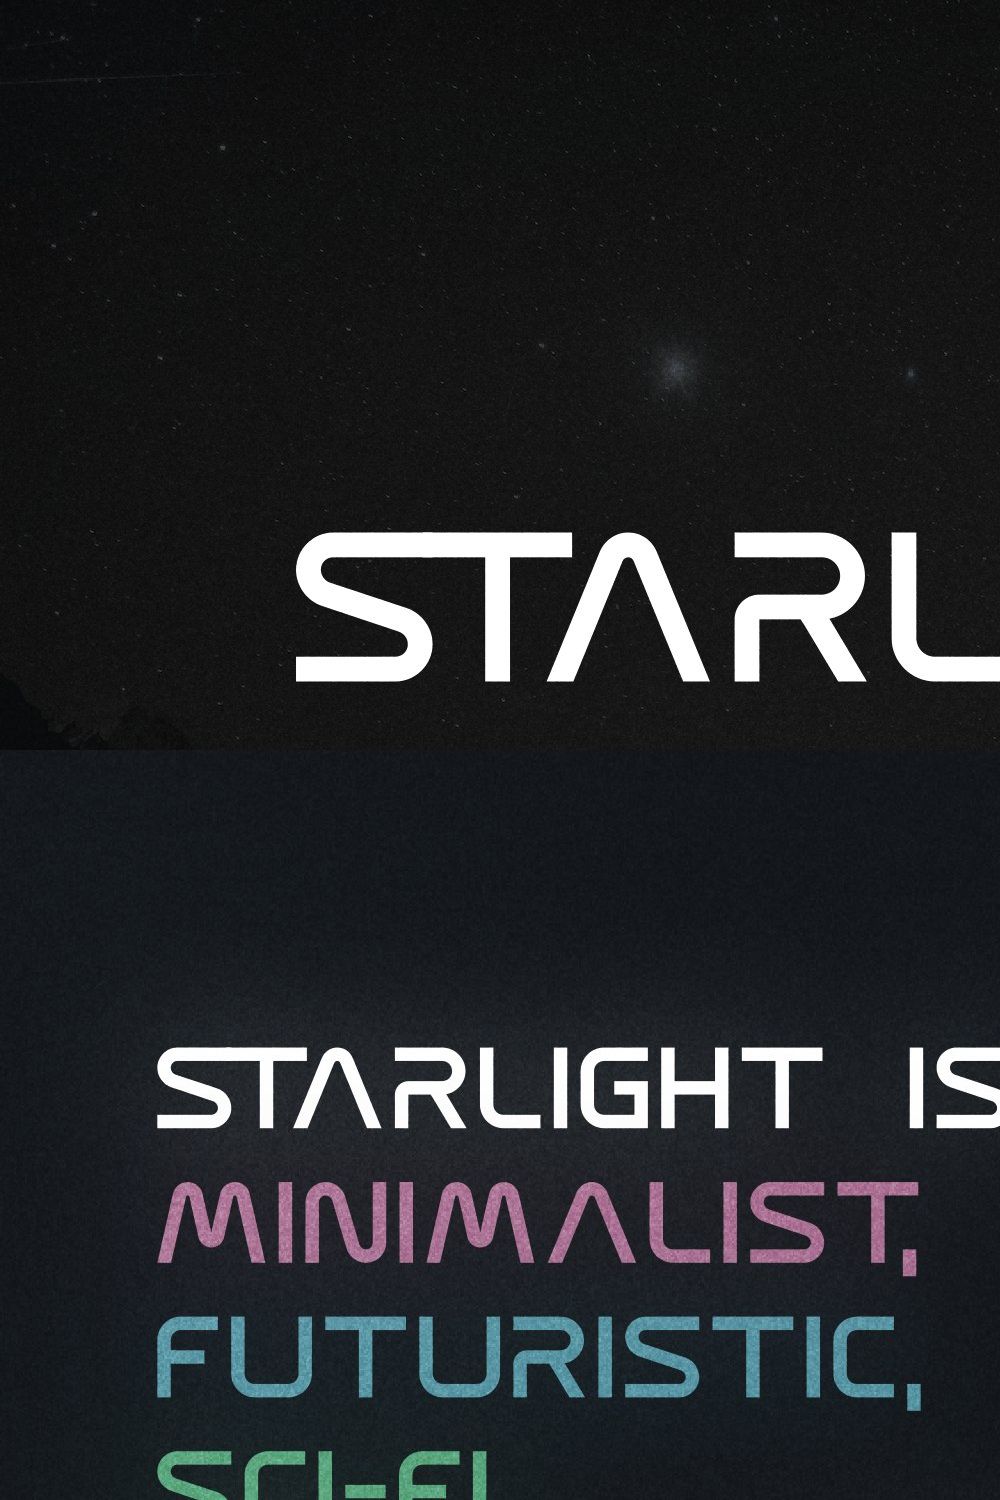 Starlight pinterest preview image.